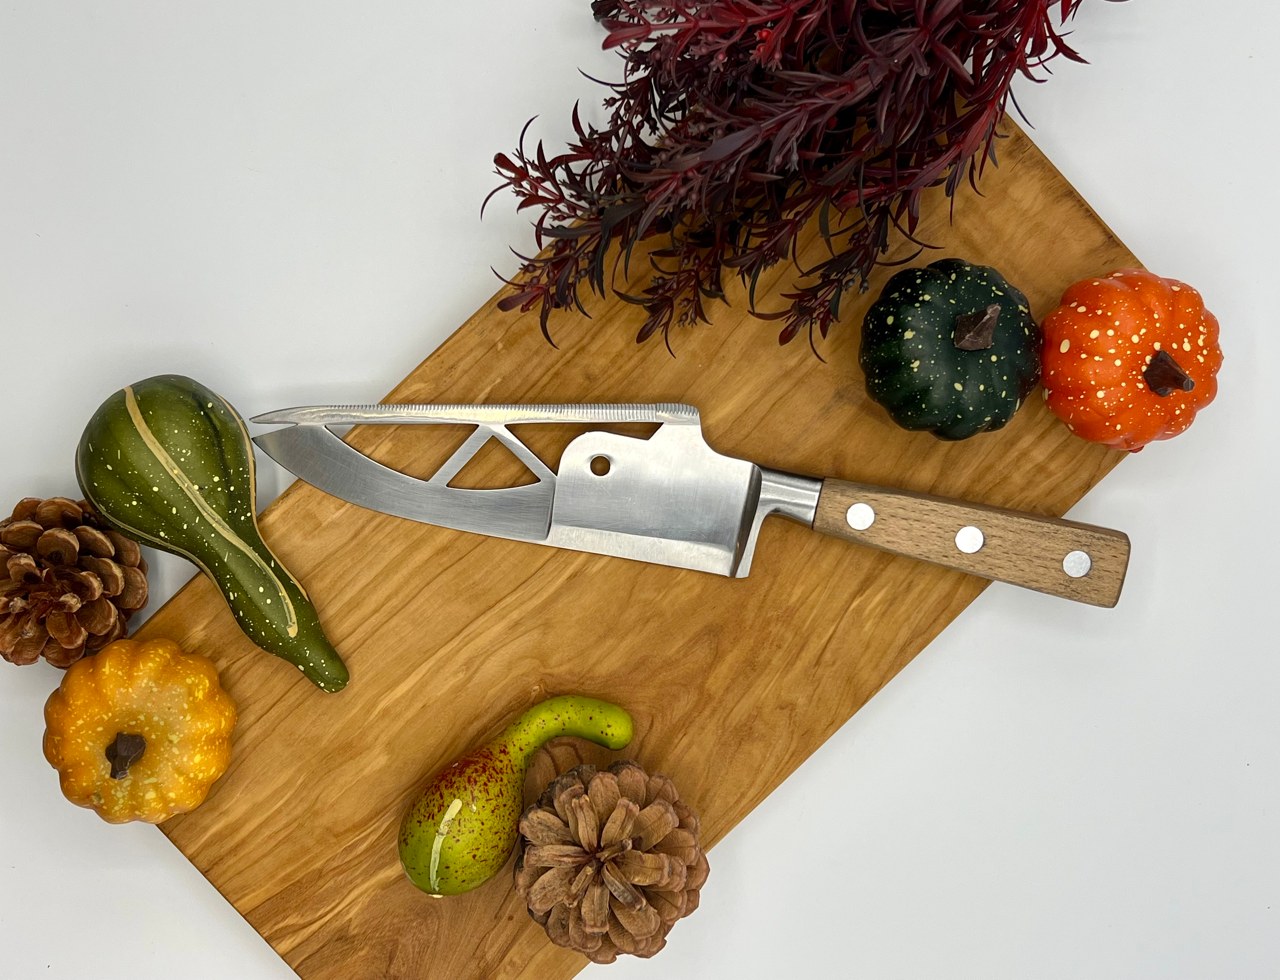 This travel cutting board with a built-in knife cuts out the stress of food  prep on the go - Yanko Design